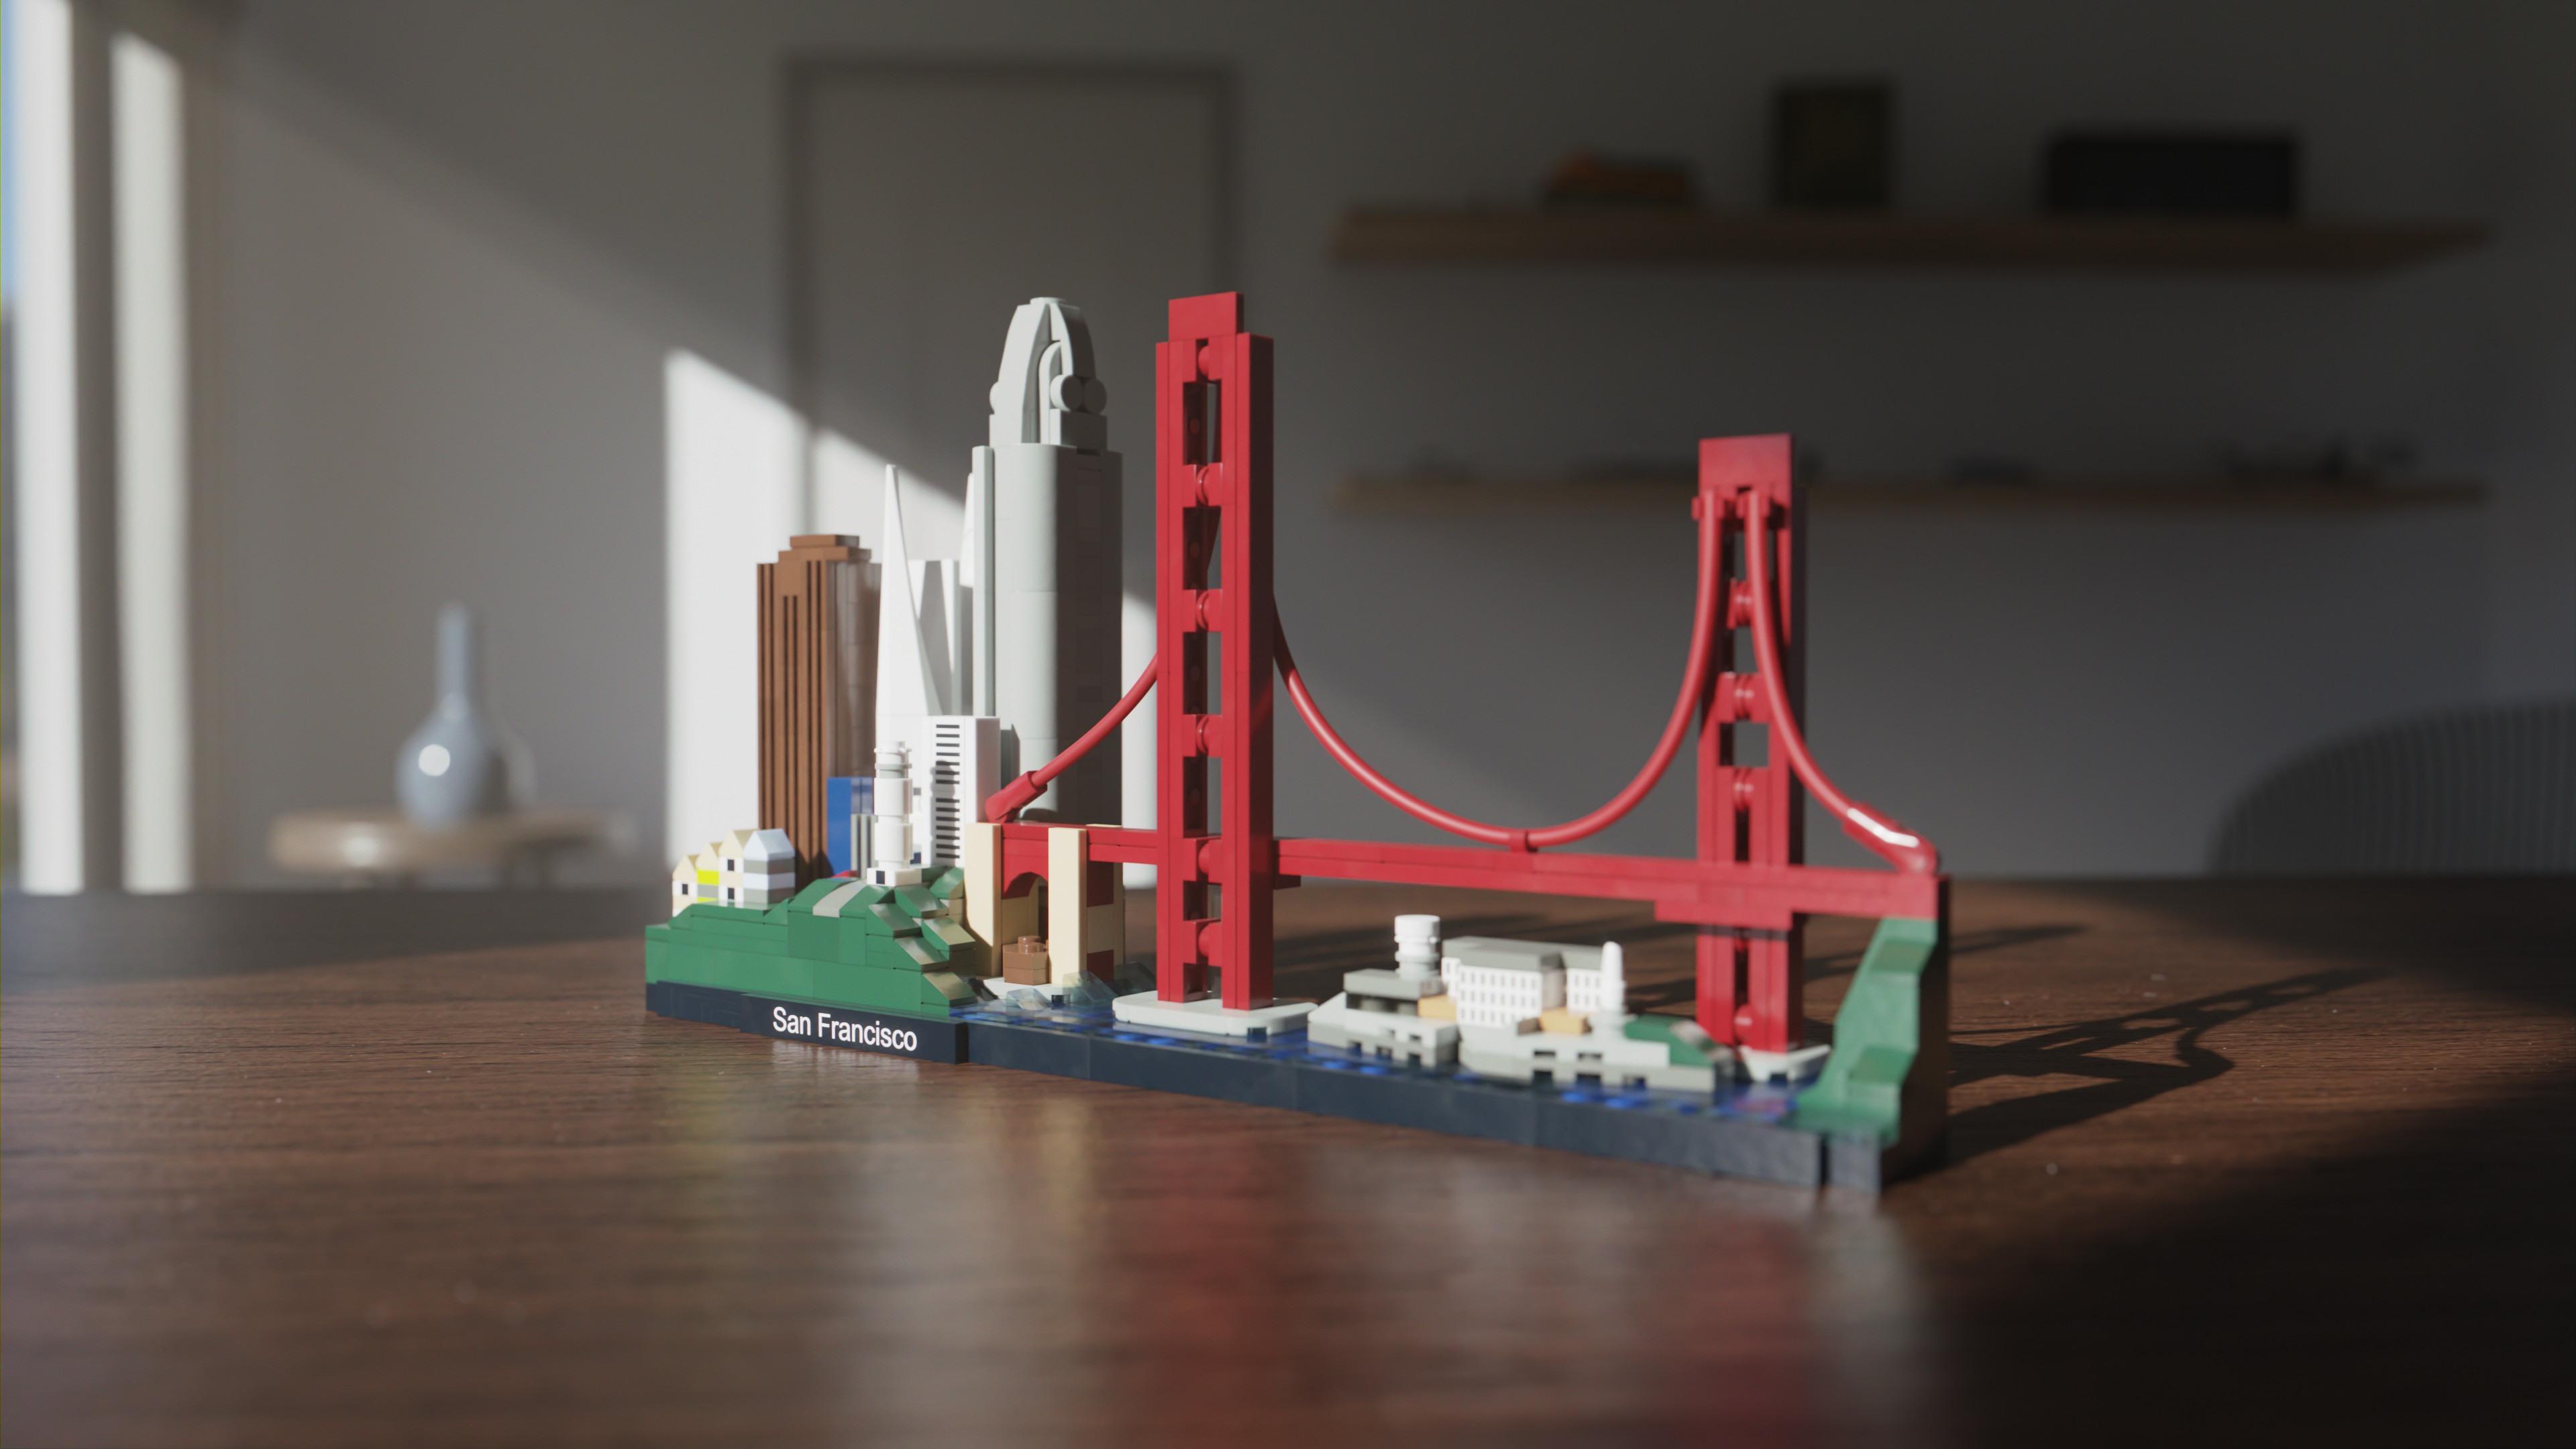 Image of a Lego Model of San Francisco, sitting on table in a room lit with some windows on the left-hand side.